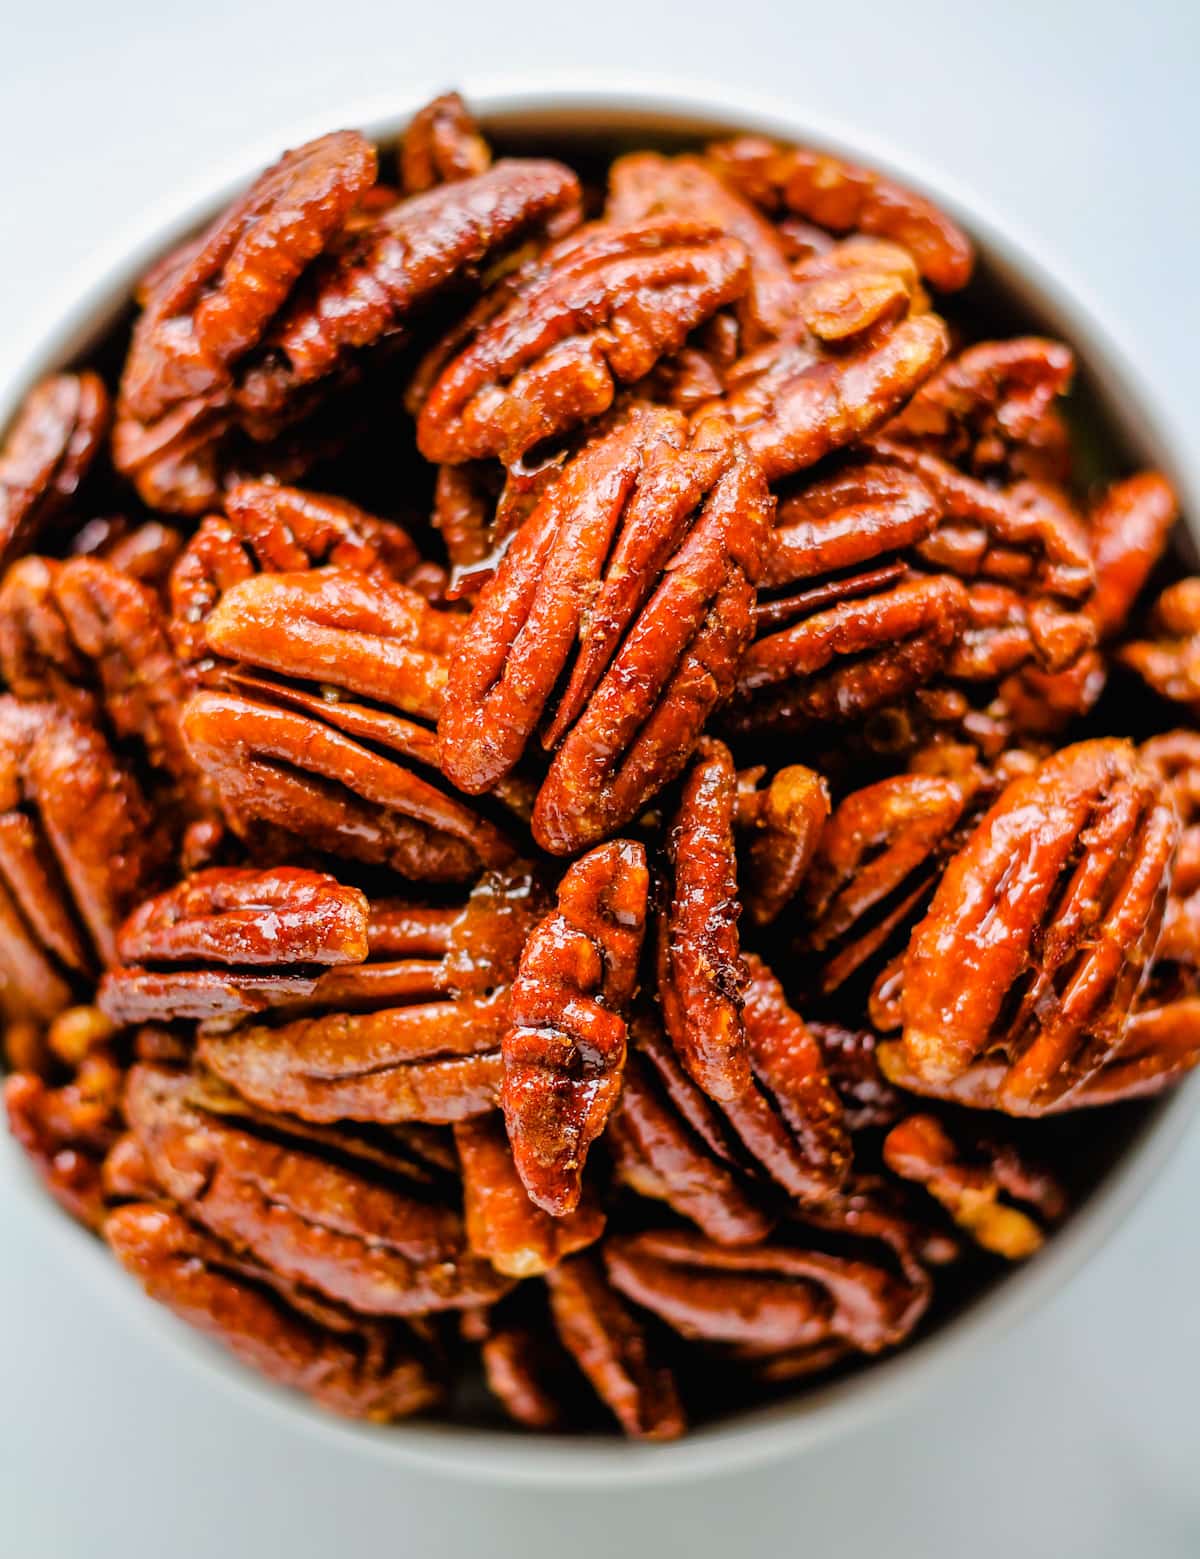 Overhead image of a bowl of spicy candied pecans.